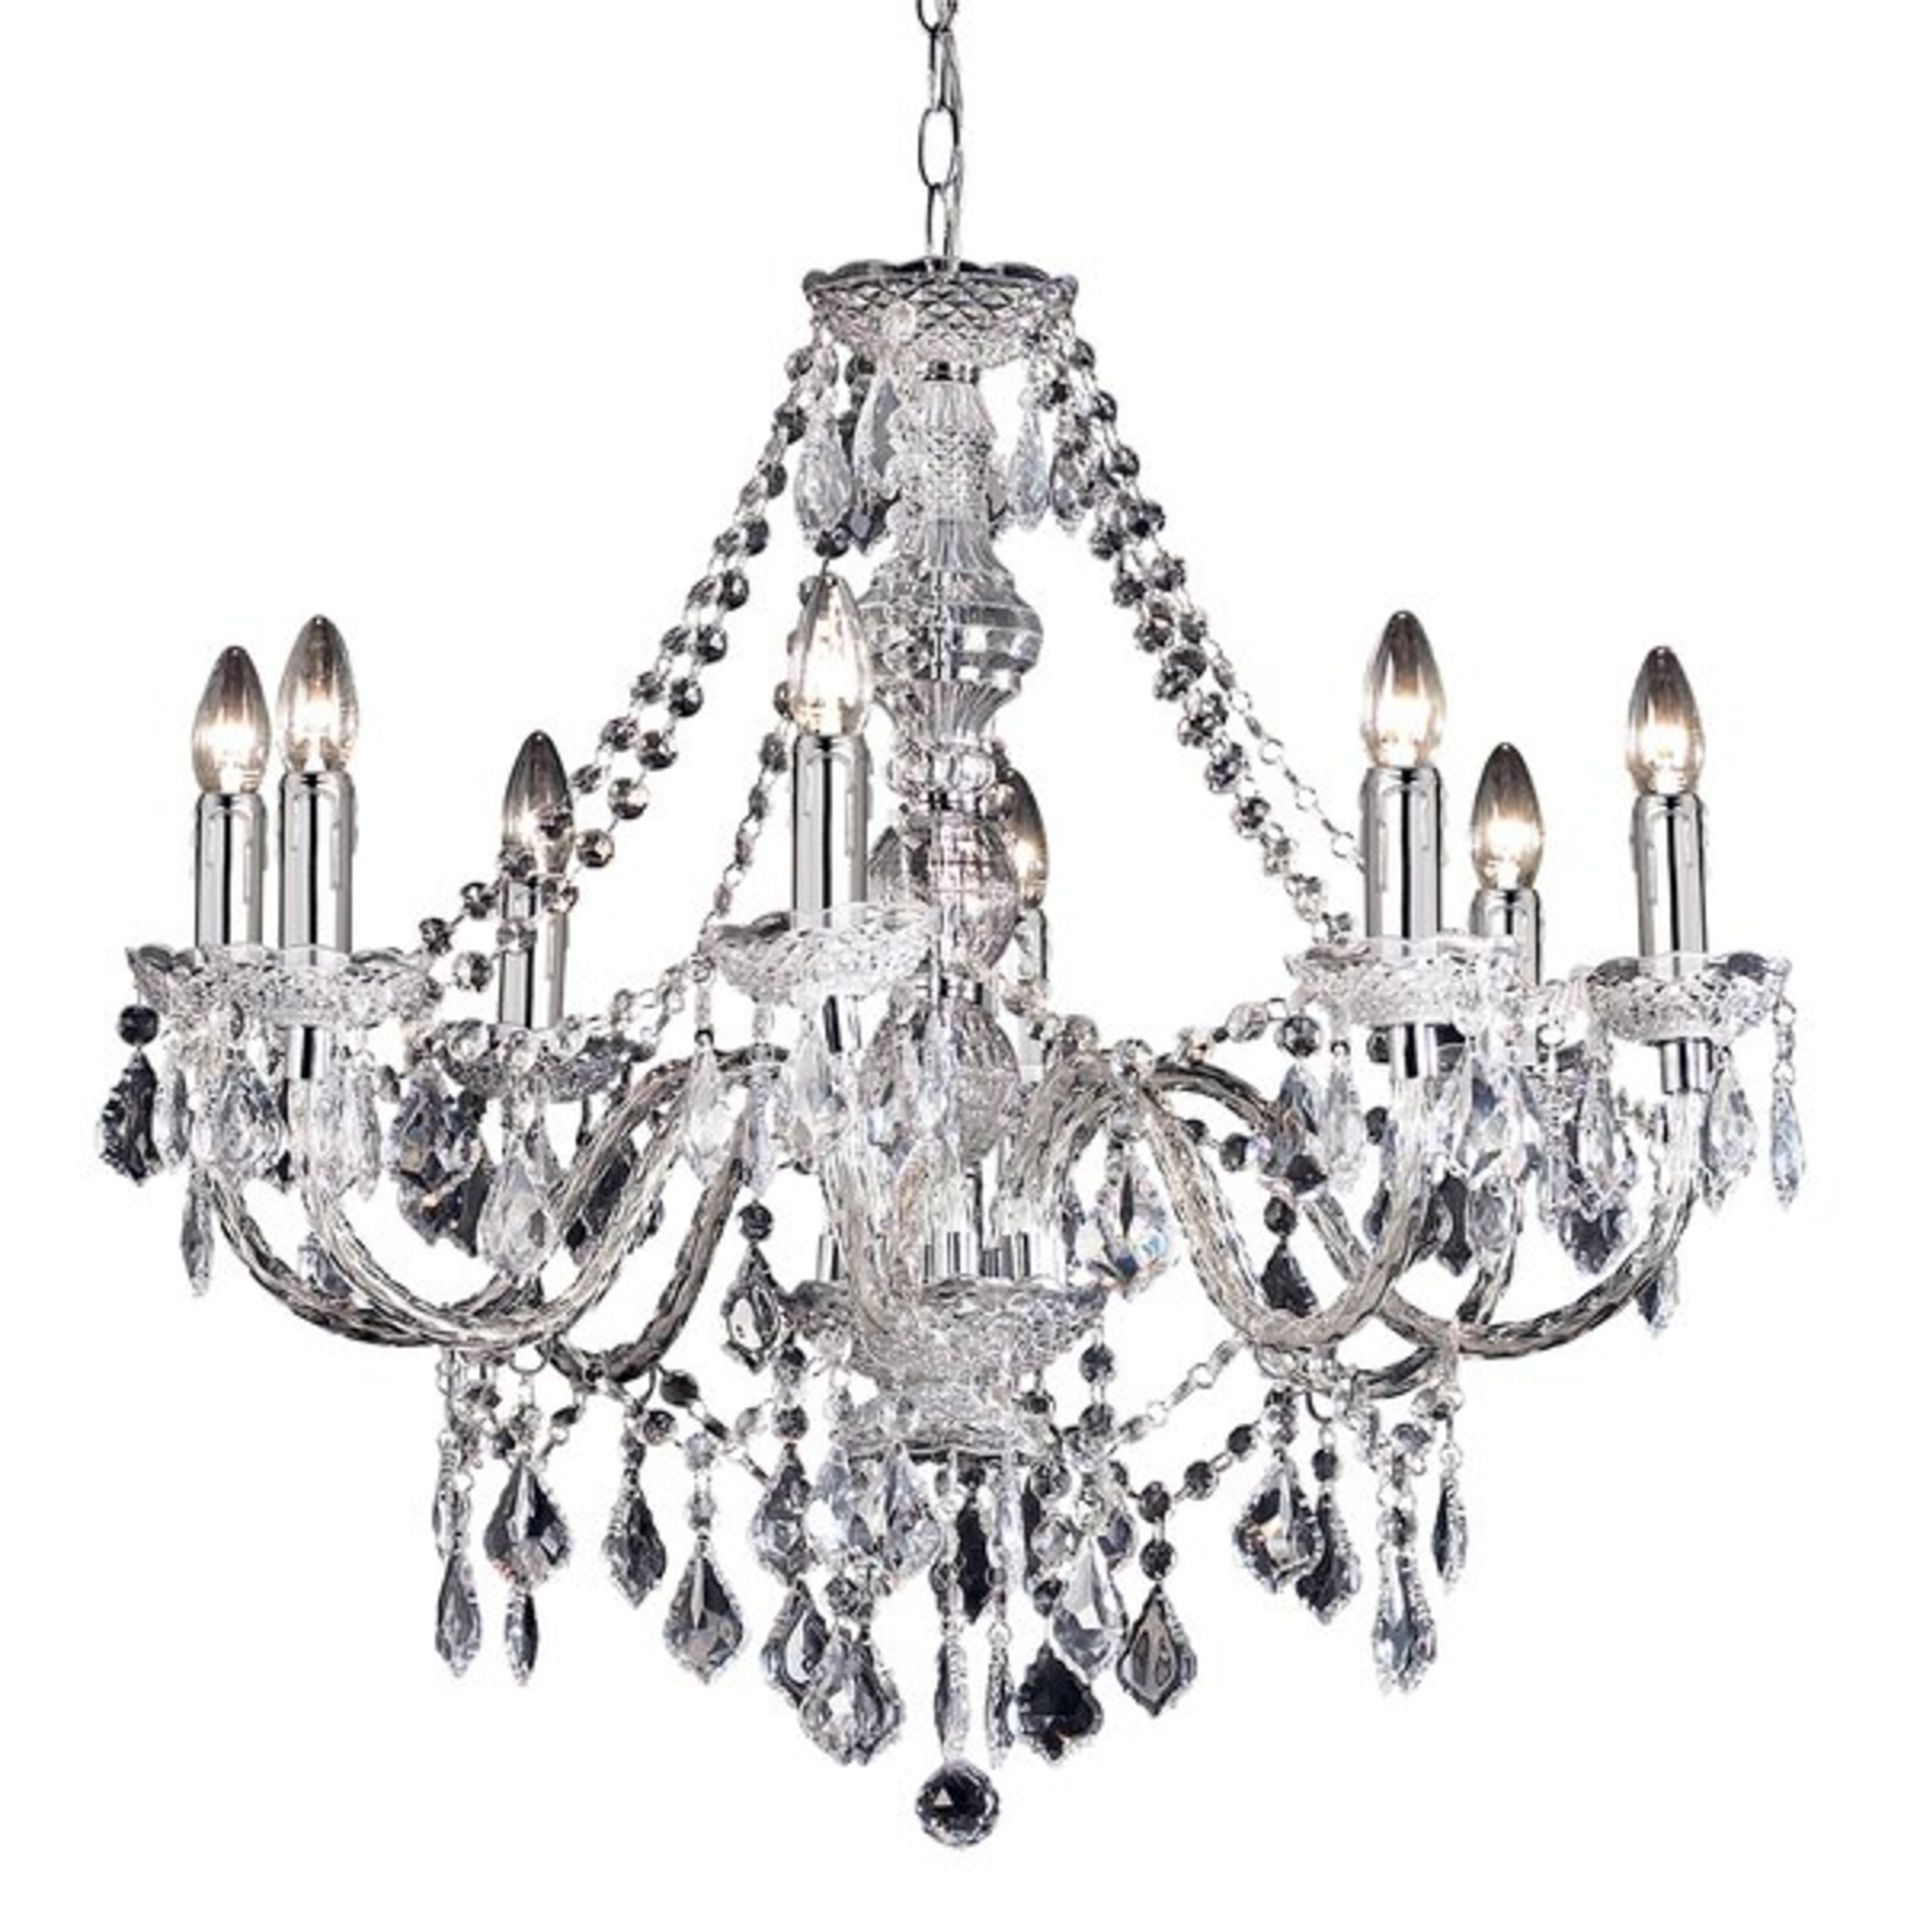 Endon Lighting 308 Candle-Style Chandelier